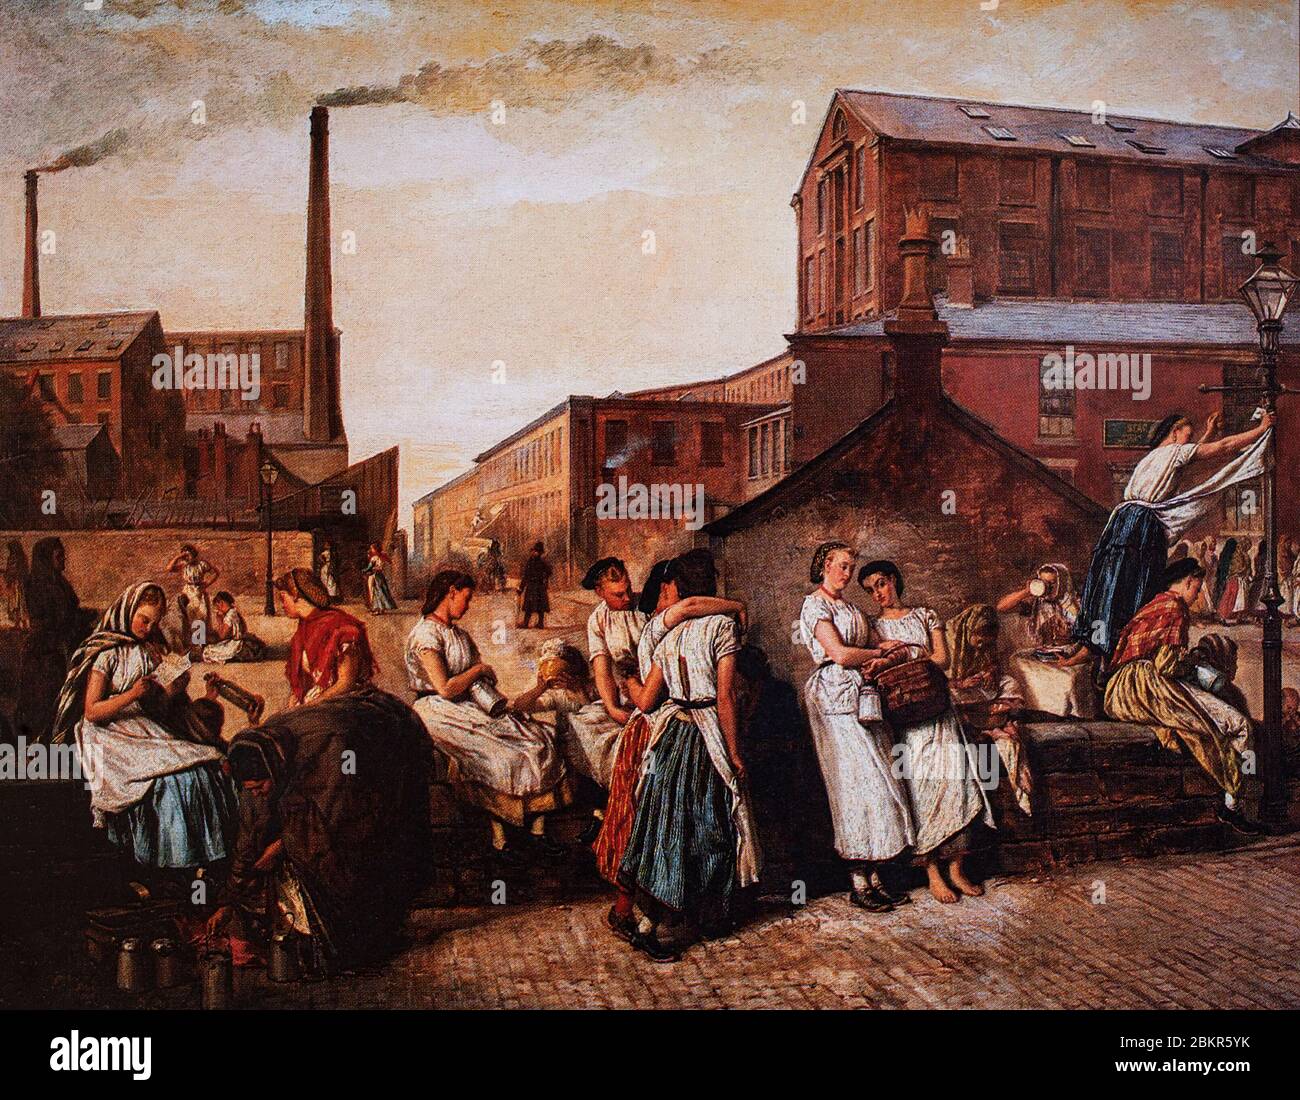 'The Dinner Hour' at  Victoria Mill, Wallgate, Wigan illustrates a straightforward and unromanticised view of working people in an industrial setting. It was created in 1874 by Eyre Crowe ARA (1824–1910),an English painter, principally of historical art and genre scenes, but with an interest in social realism. Stock Photo